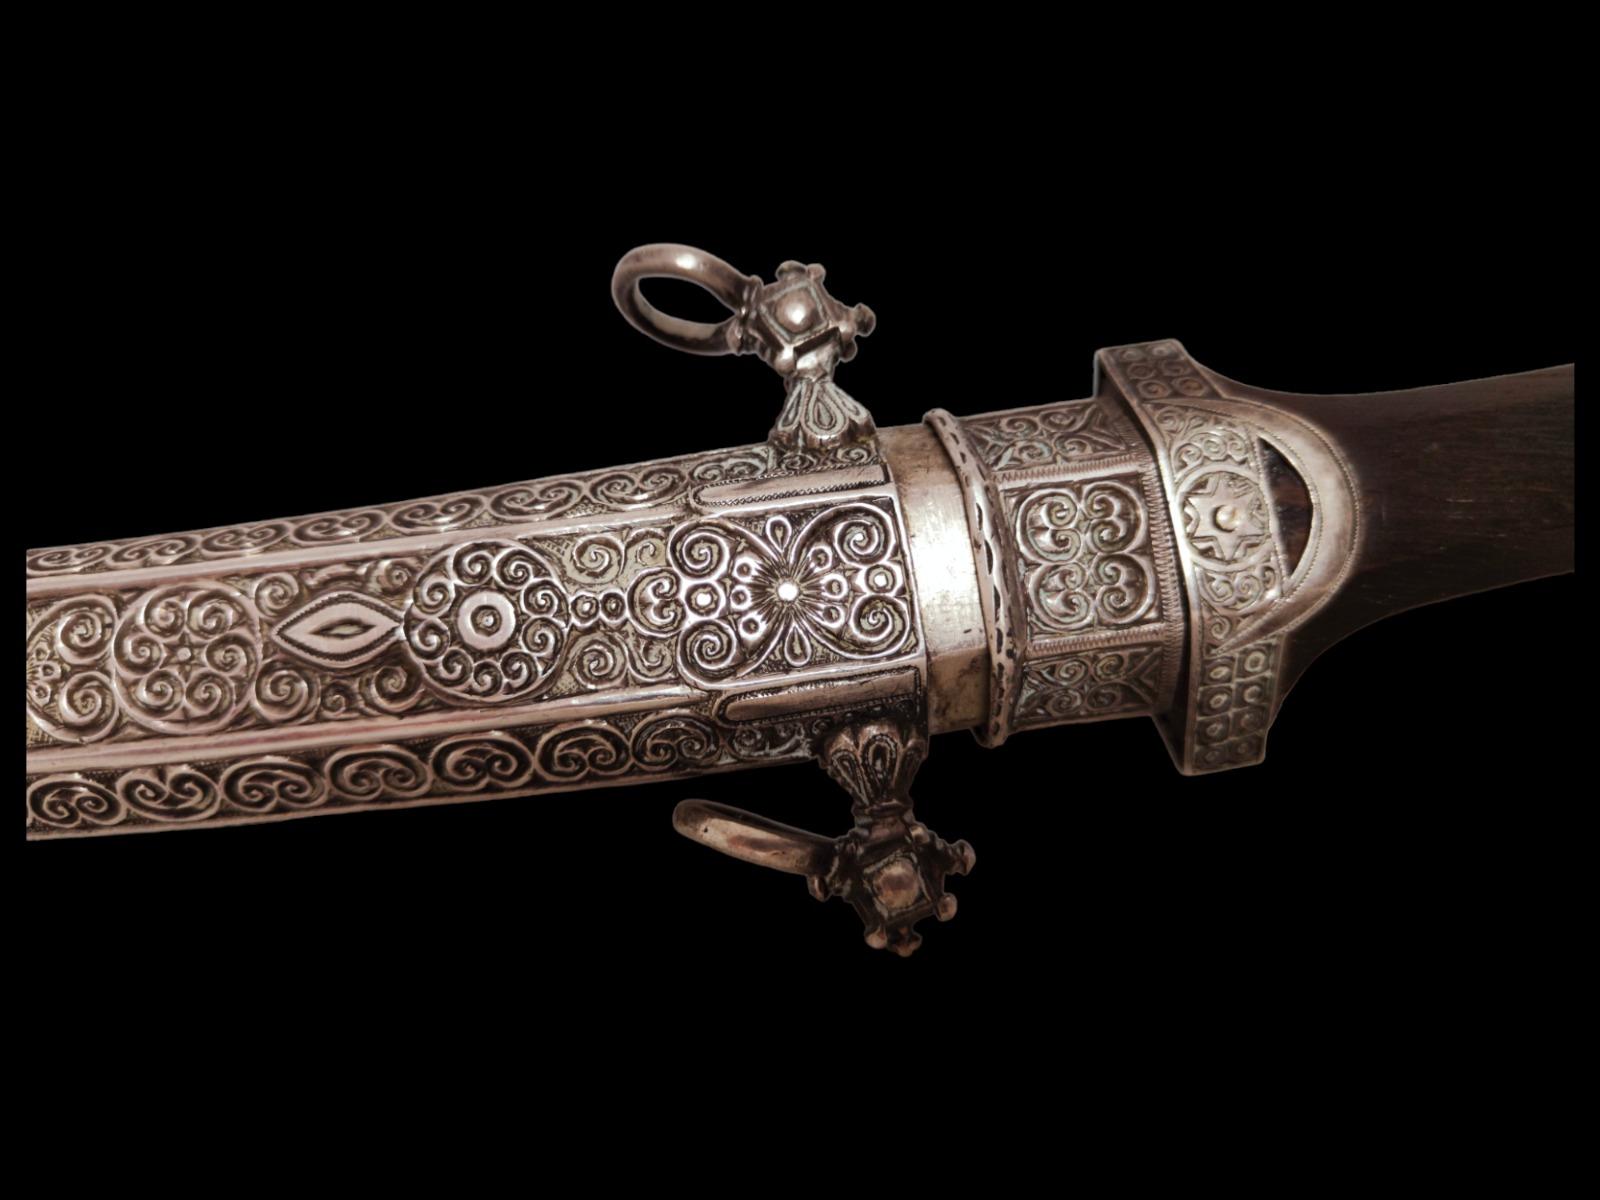 Hand-Crafted Silver Knife 19th Century